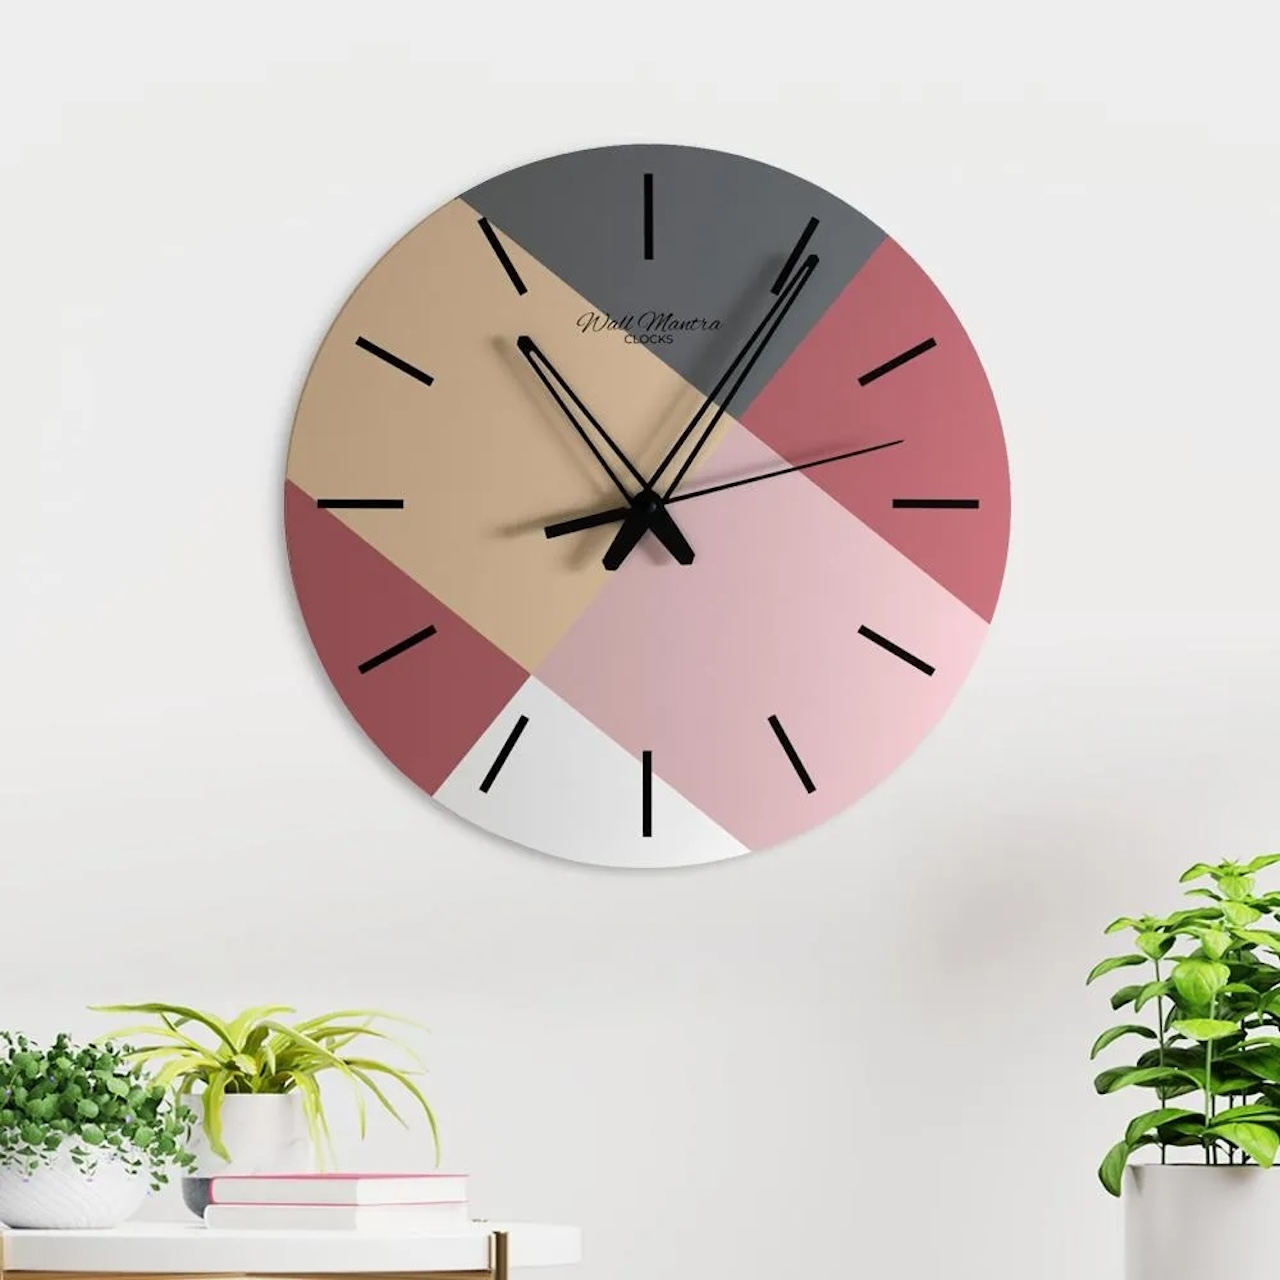 Which Direction Should A Wall Clock Face